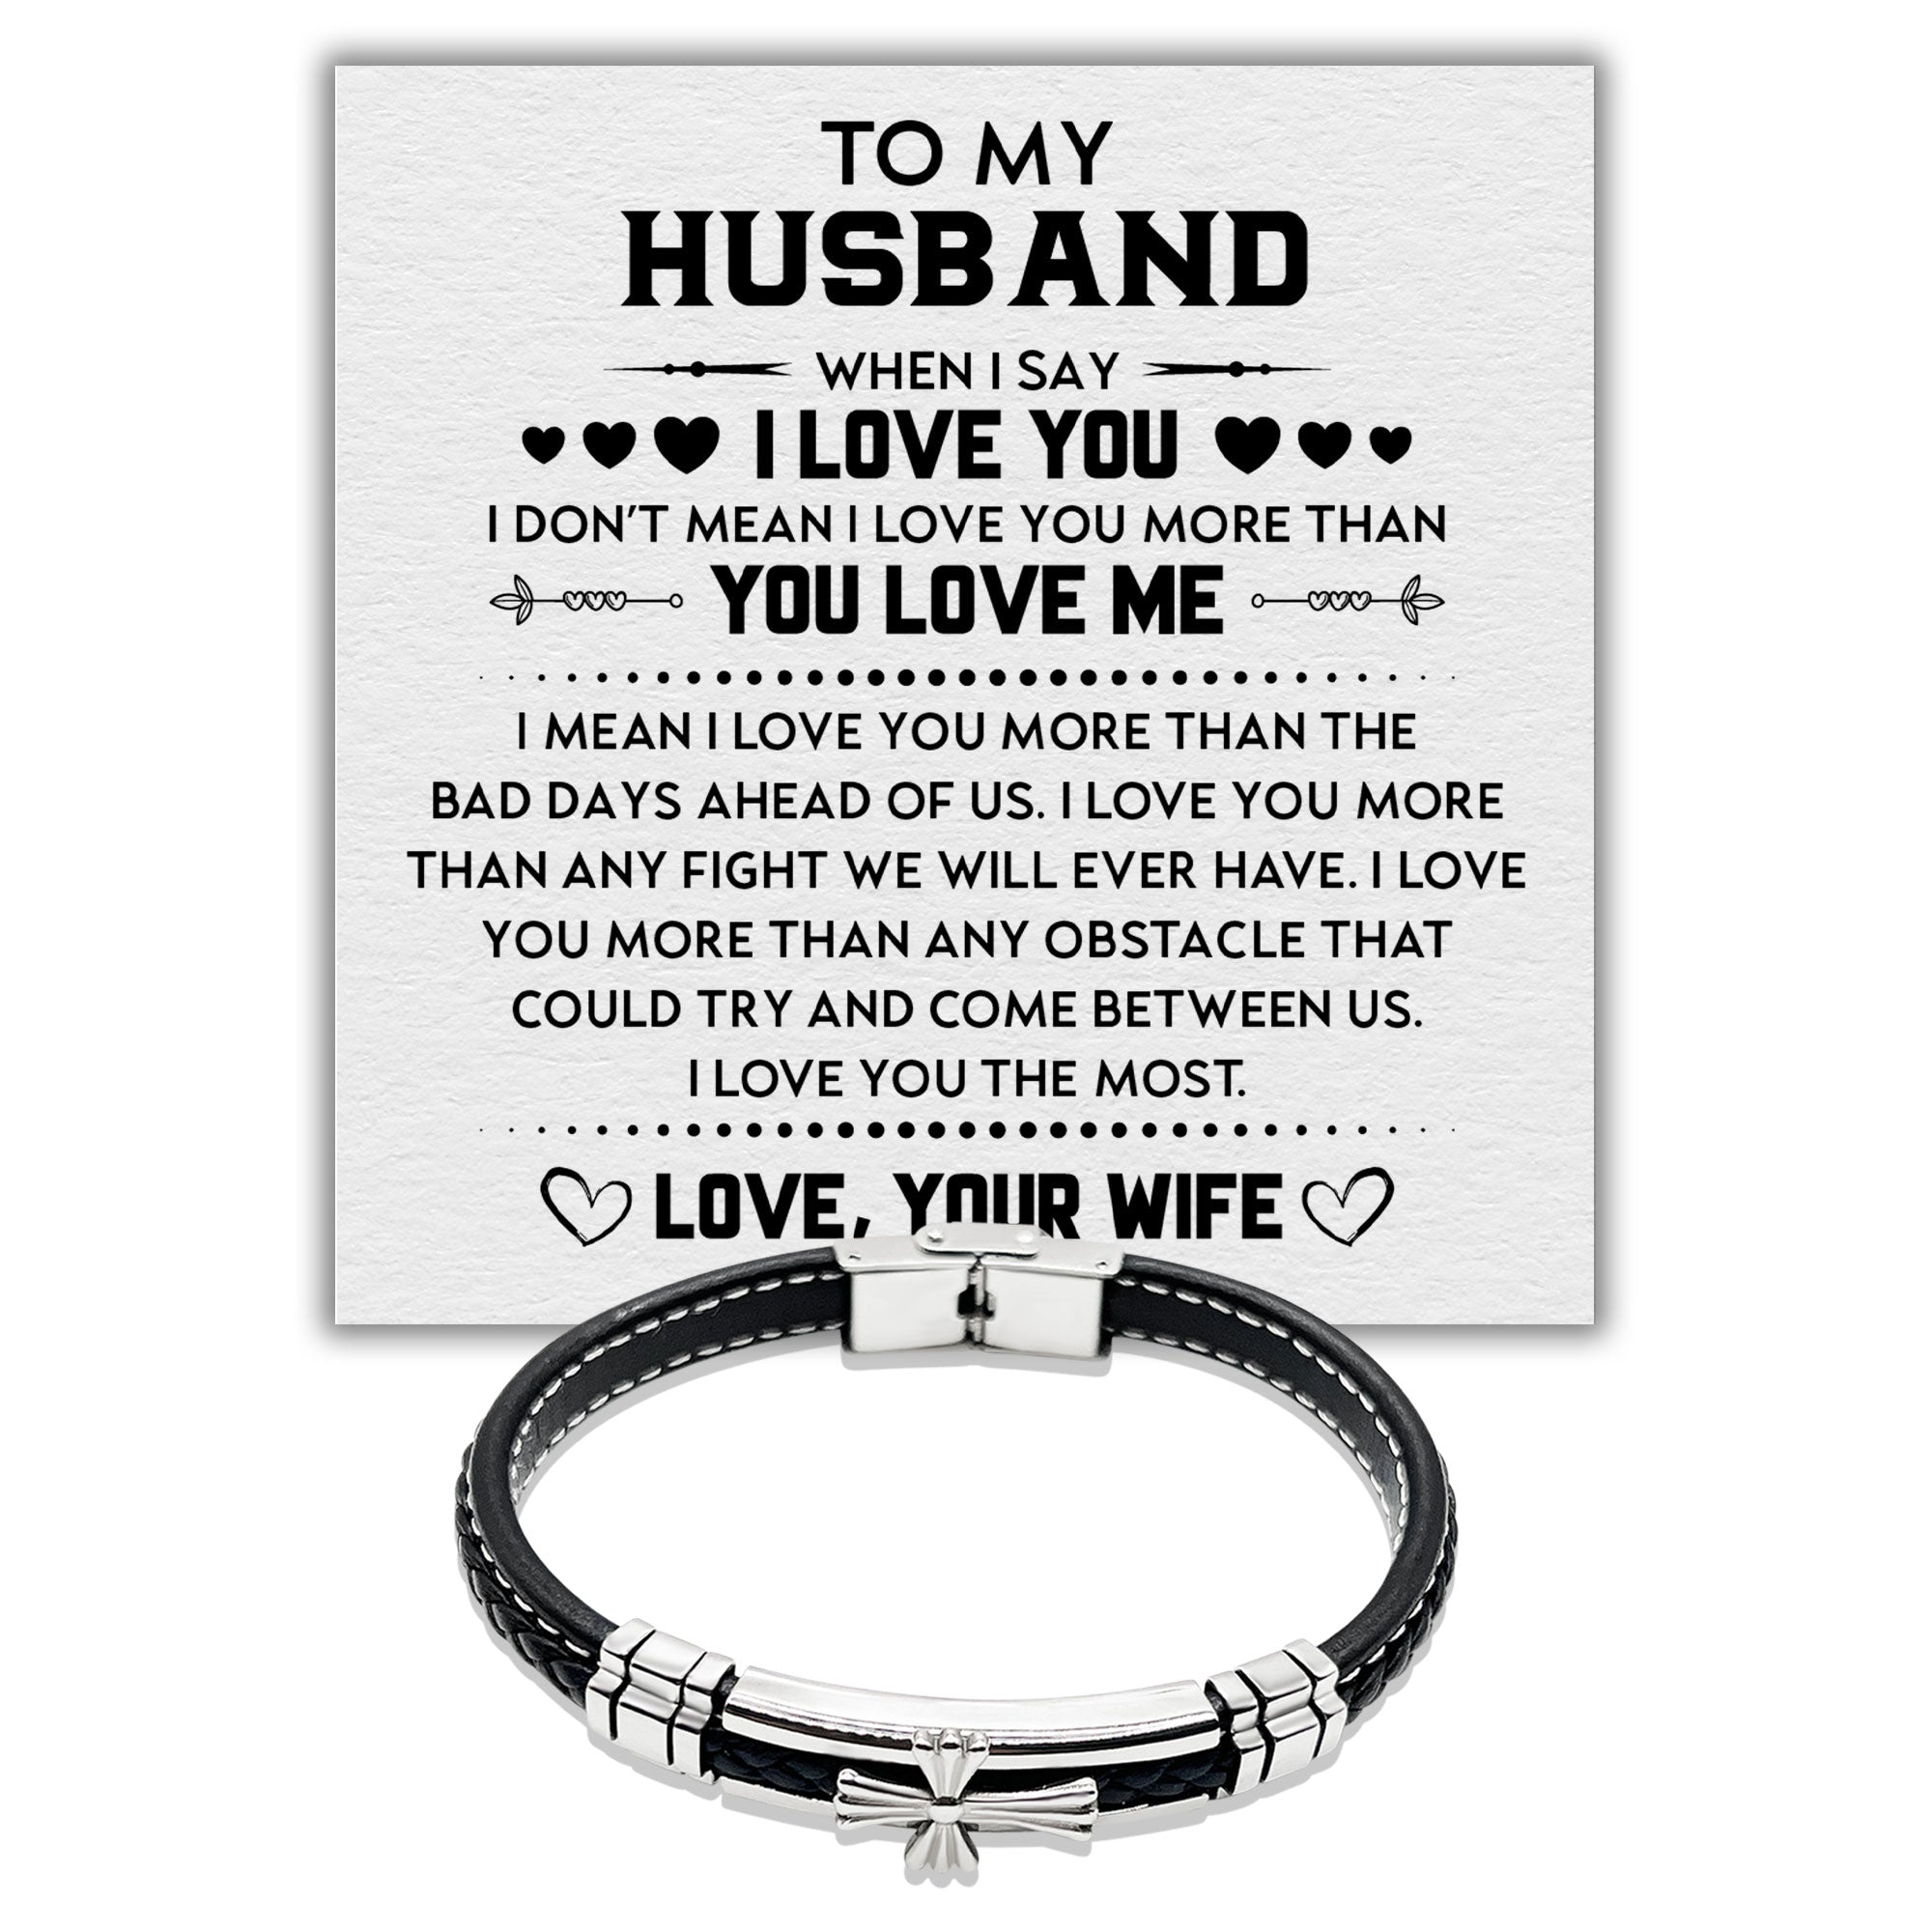 To my Husband I Love You The Most - Premium Stainless Steel Celtic Cross Black Italian Leather Bracelet